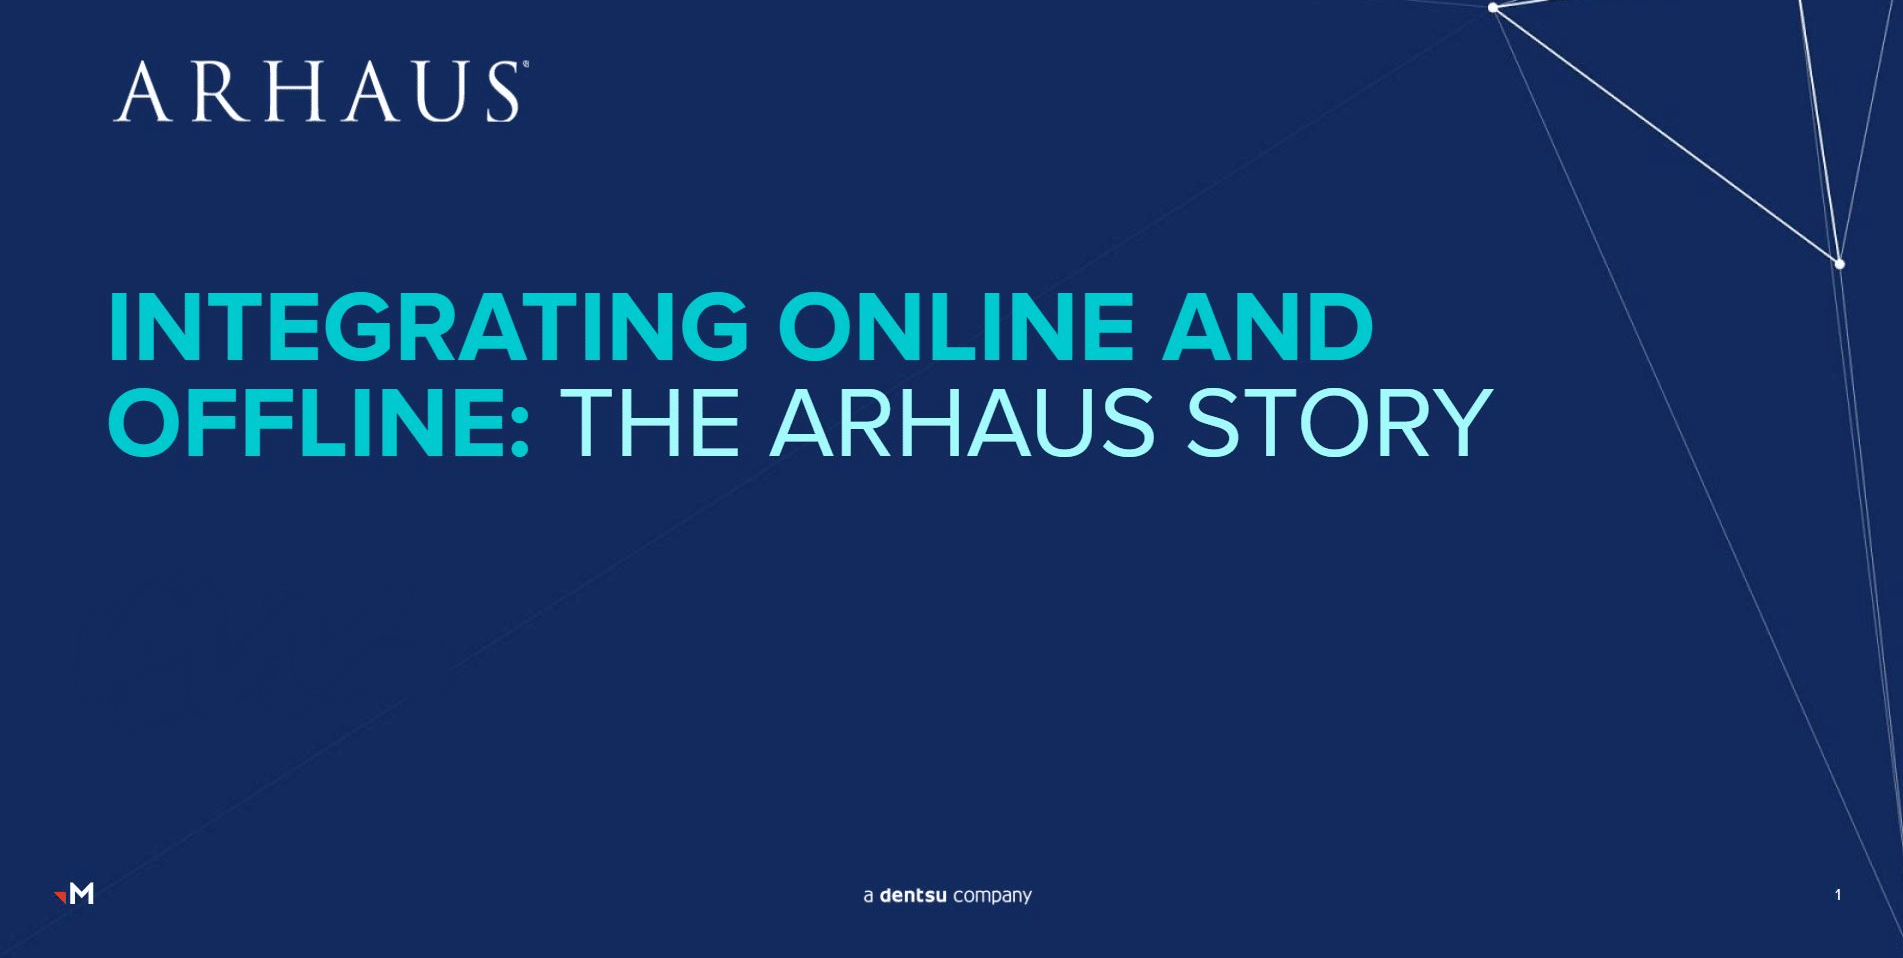 Arhaus integrated online and offline shoppers in its new marketing strategy.